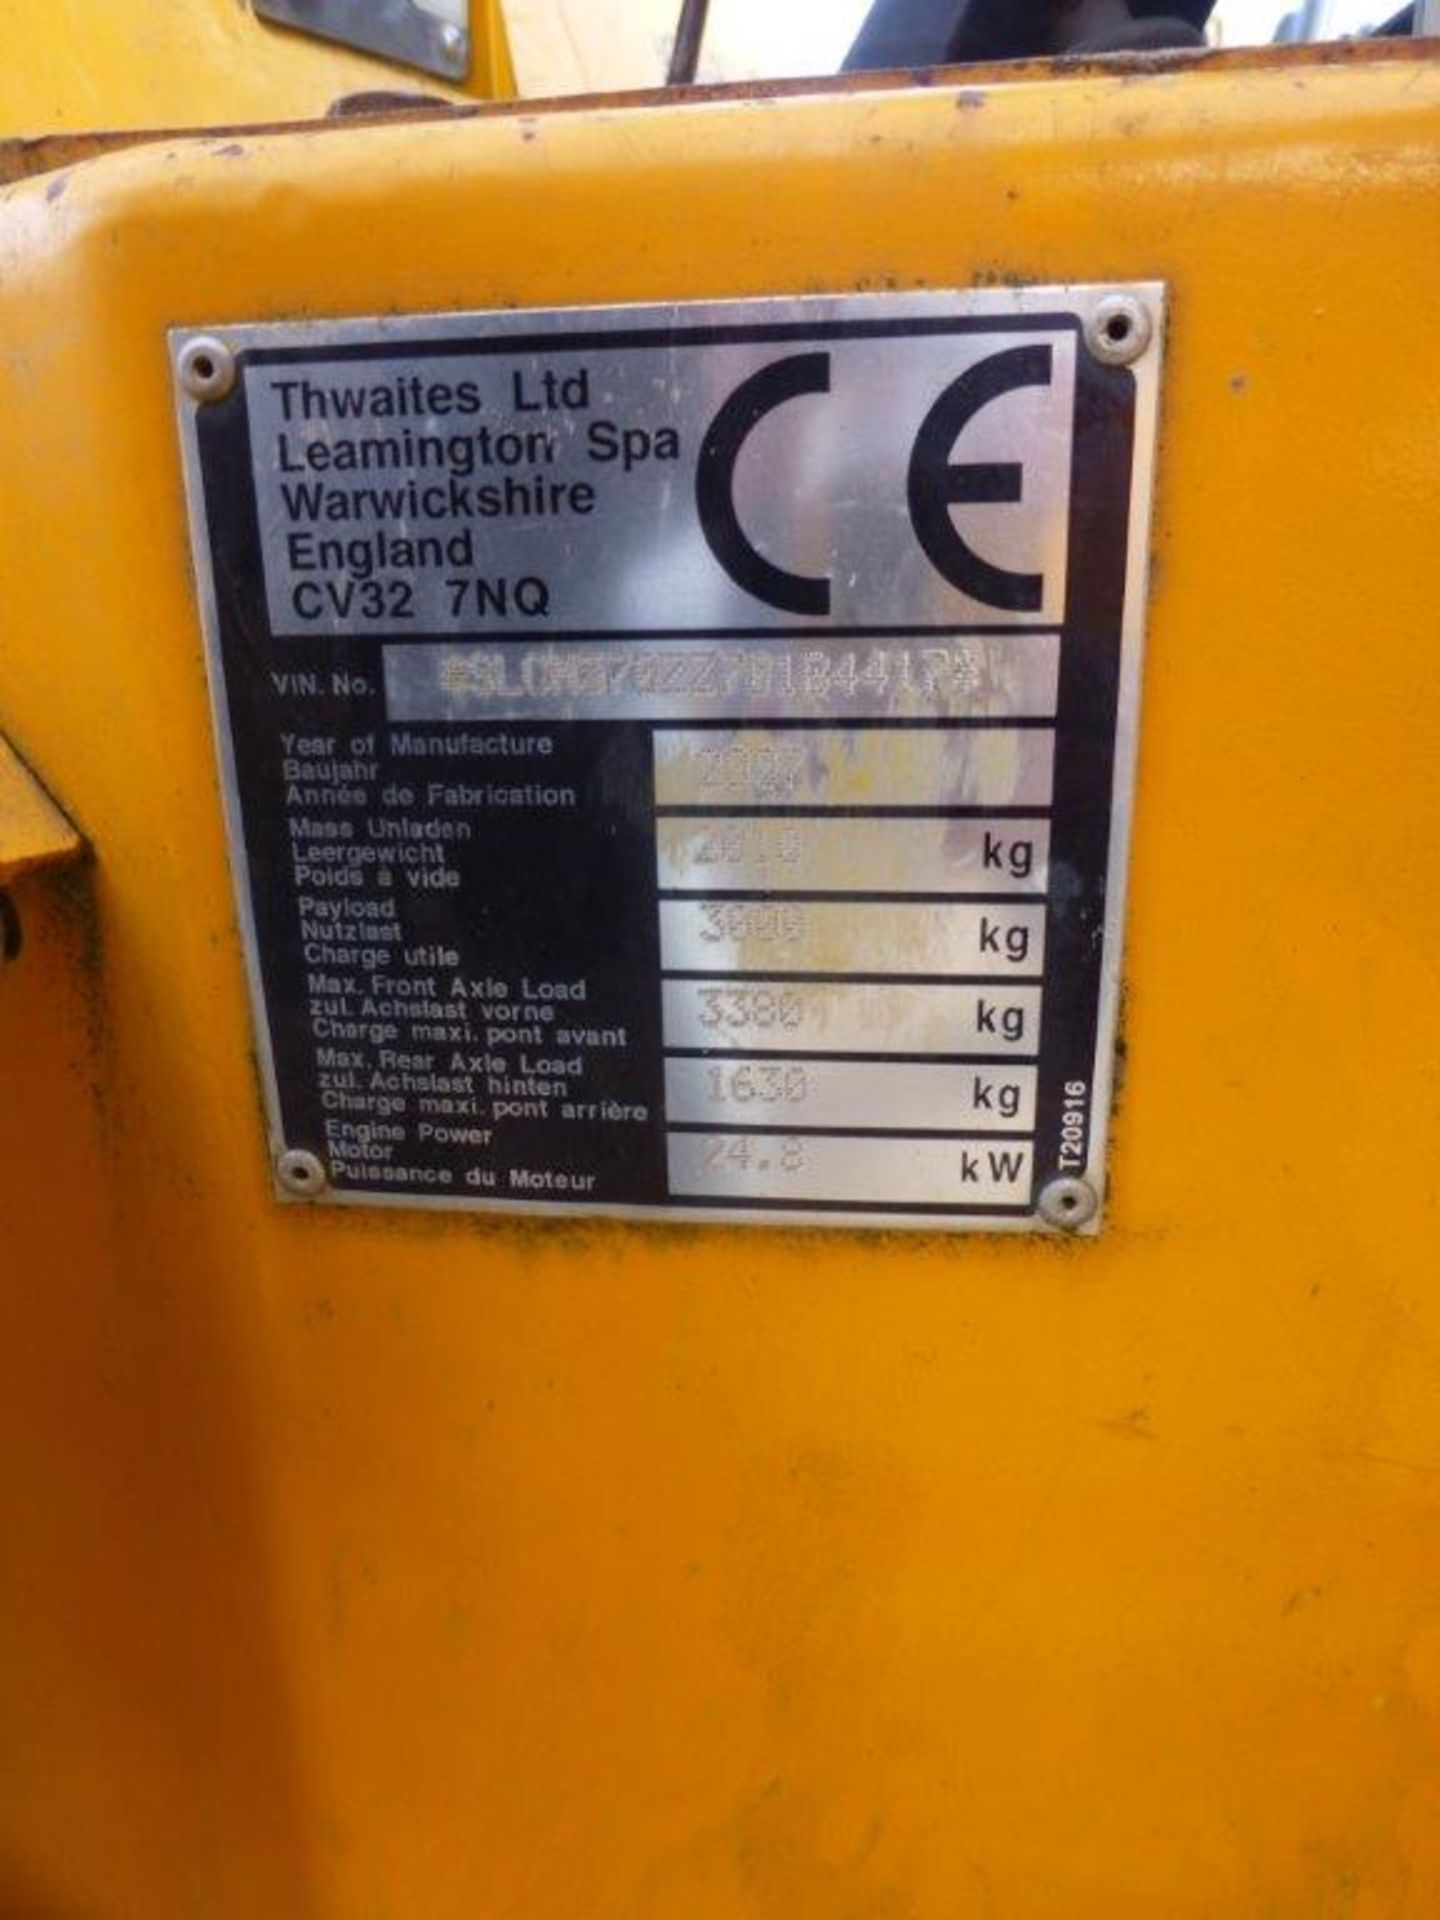 Thwaites 3-tonne articulated dumper (2007), indicated hours 777.9, weight 2010Kg, VIN no. - Image 5 of 5